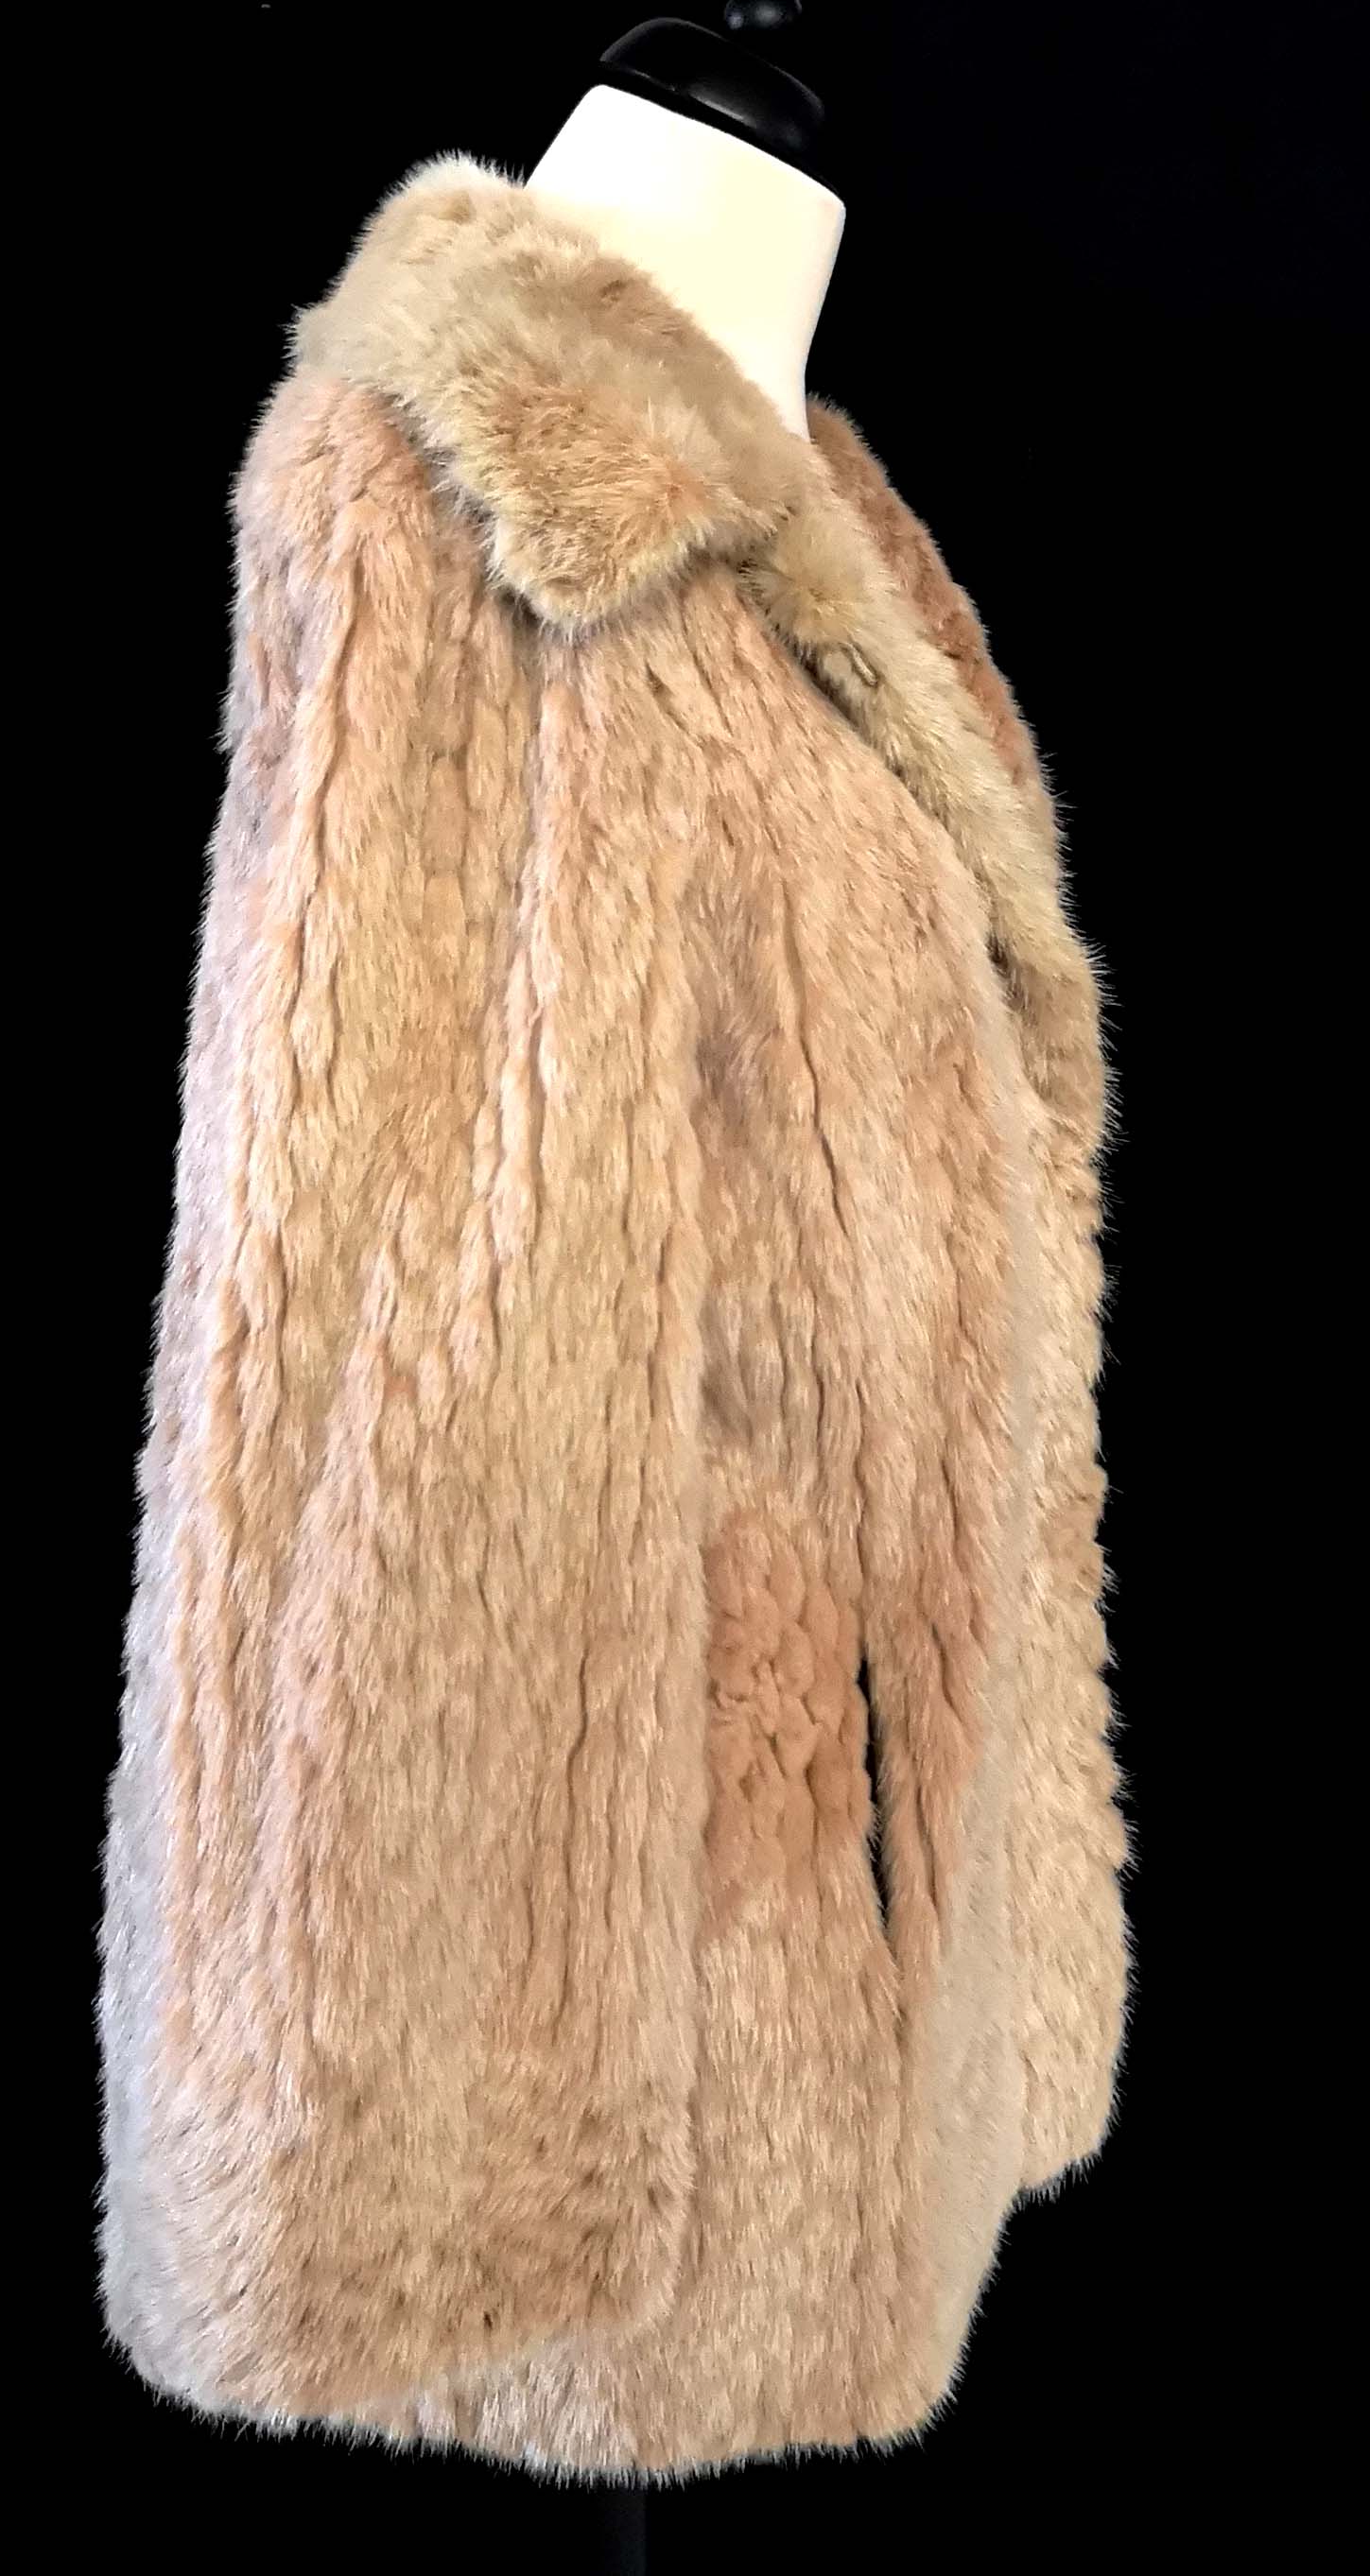 A VINTAGE BEIGE MINK SHORT COAT Fully reversible with a patchwork leather effect to one side. - Image 2 of 3